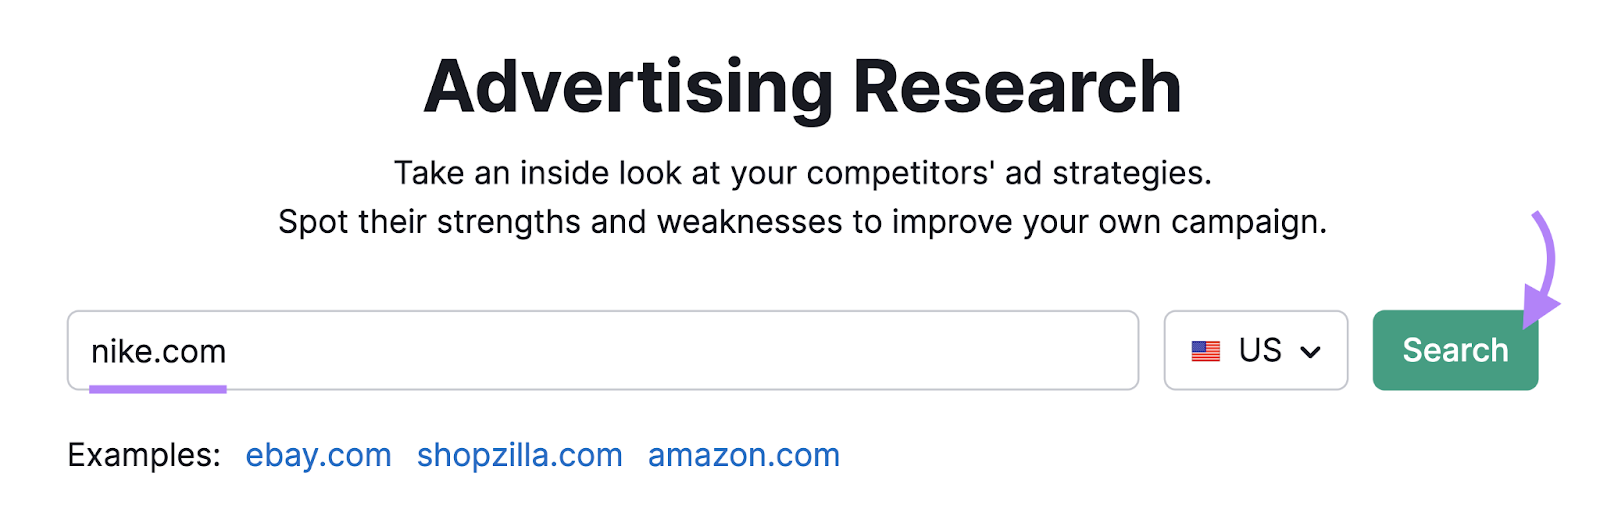 "nike.com" entered into the Advertising Research tool search bar